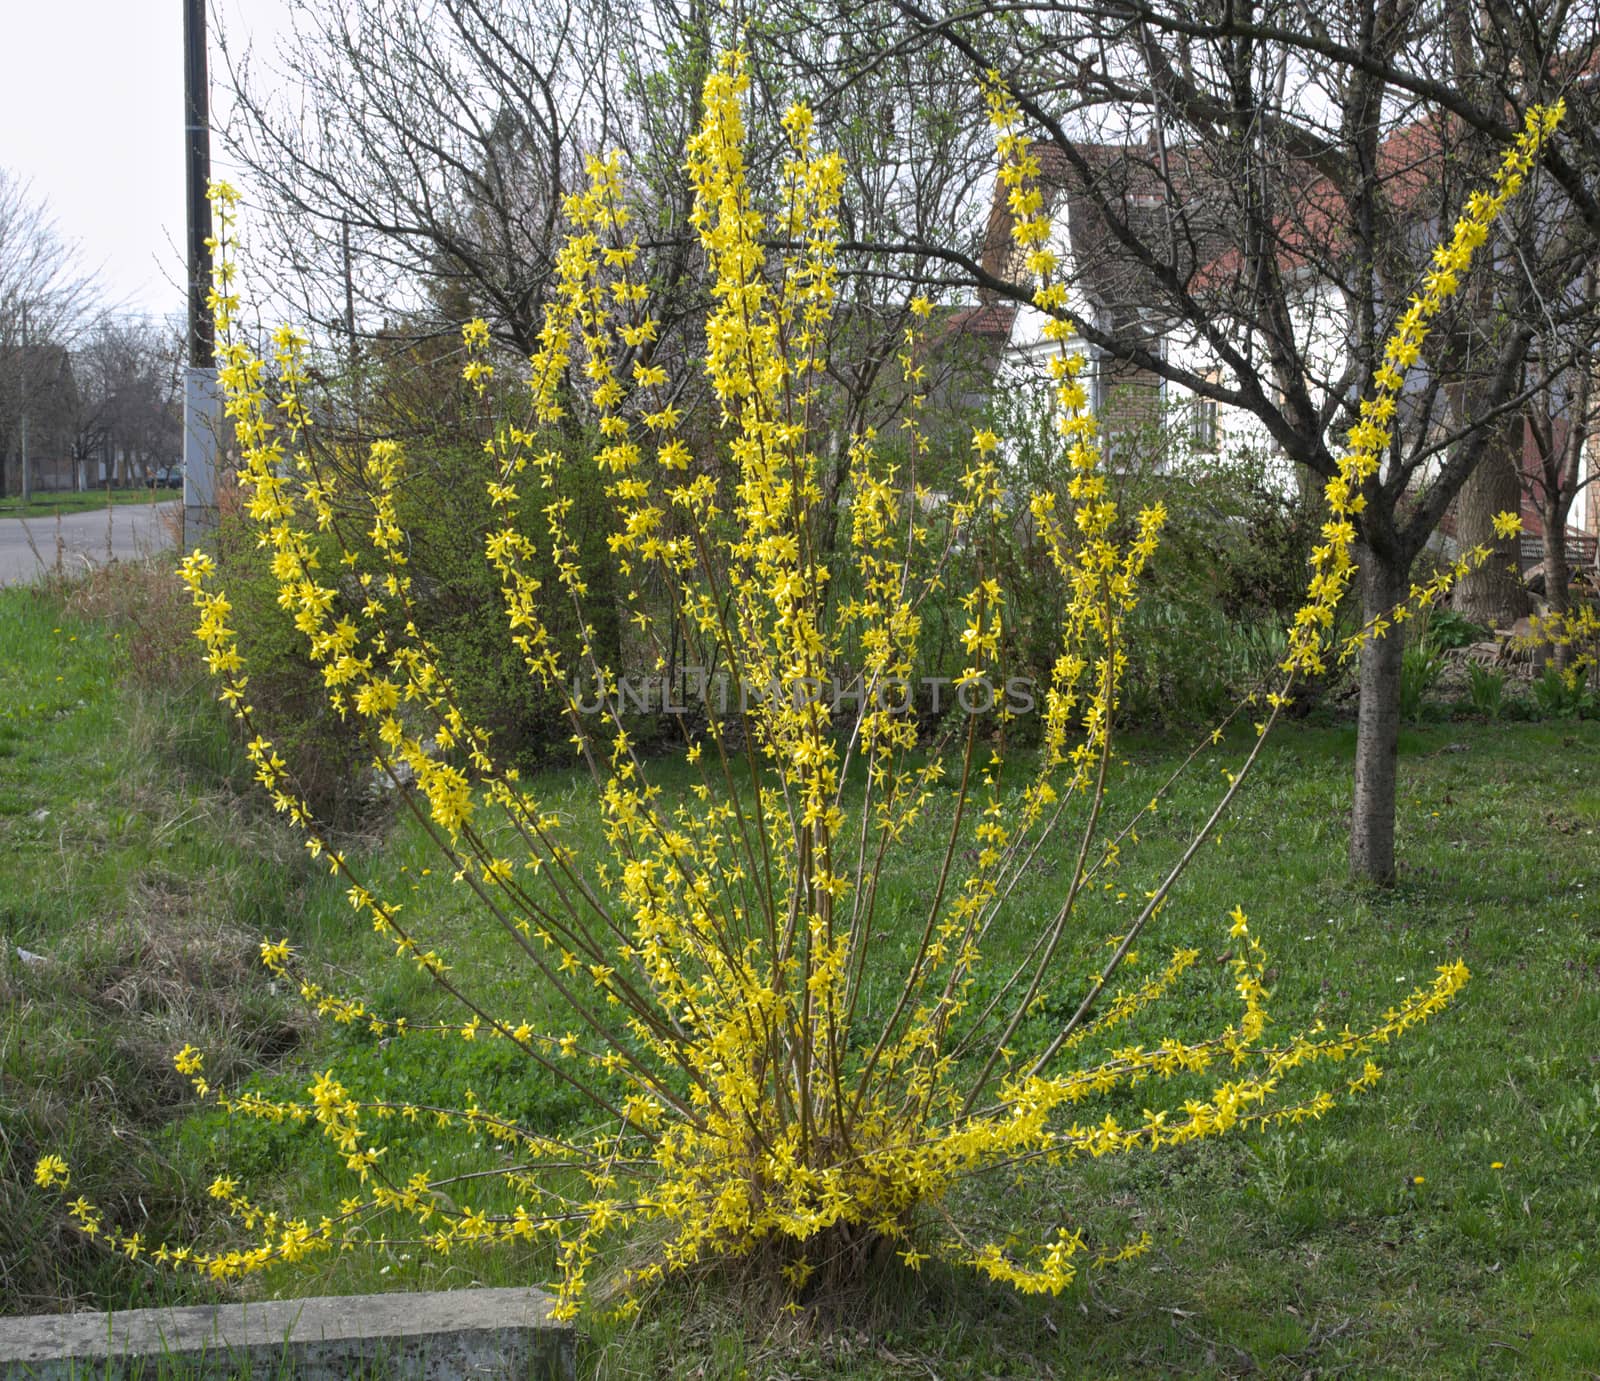 Bush blooming with yellow flowers at spring time